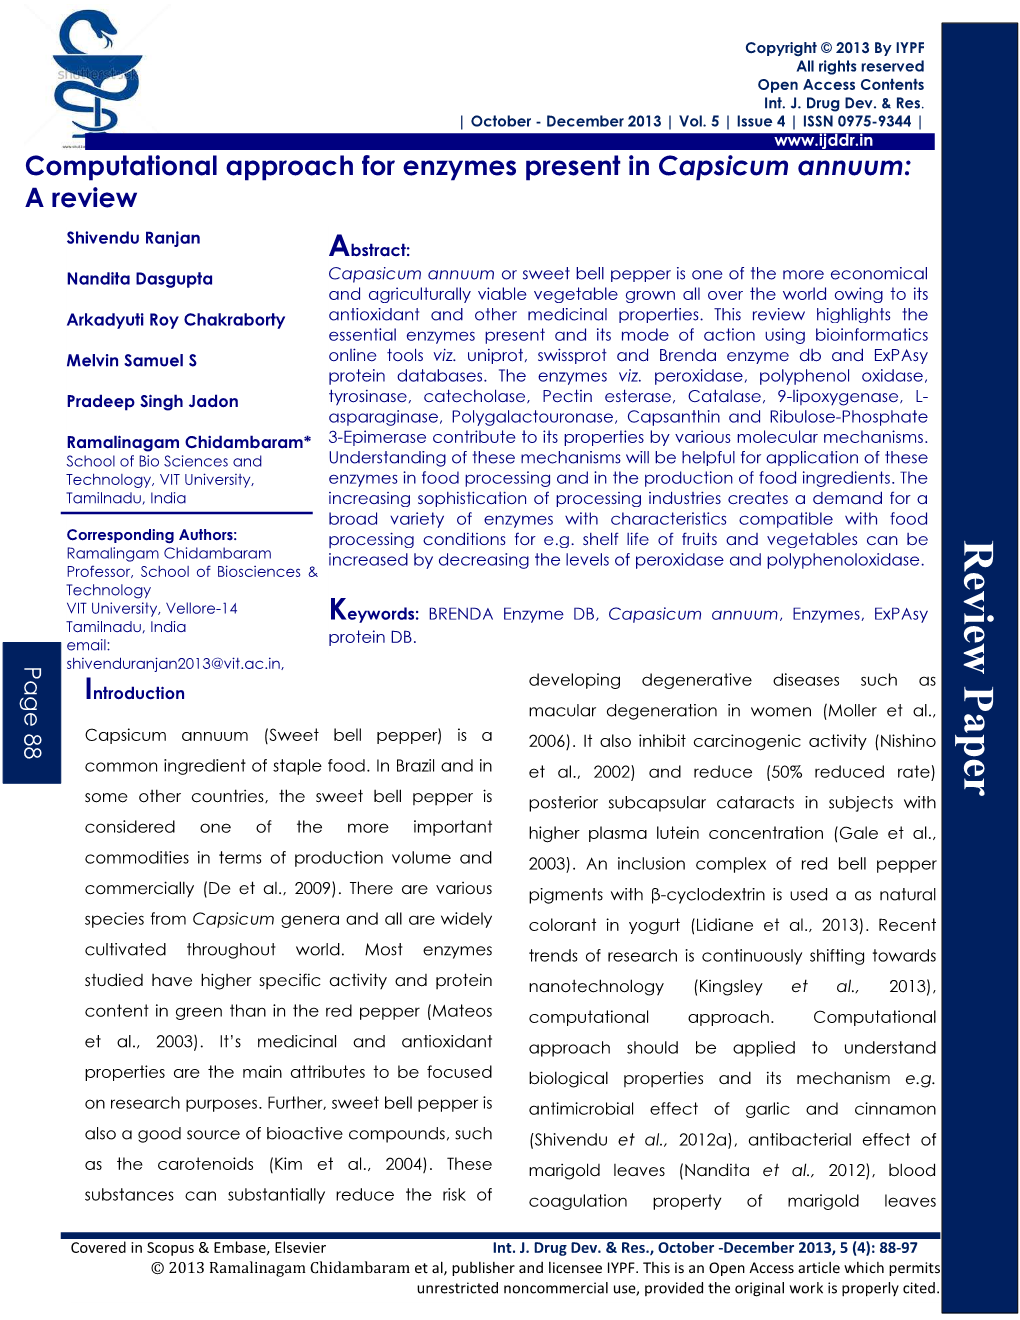 Computational Approach for Enzymes Present in Capsicum Annuum